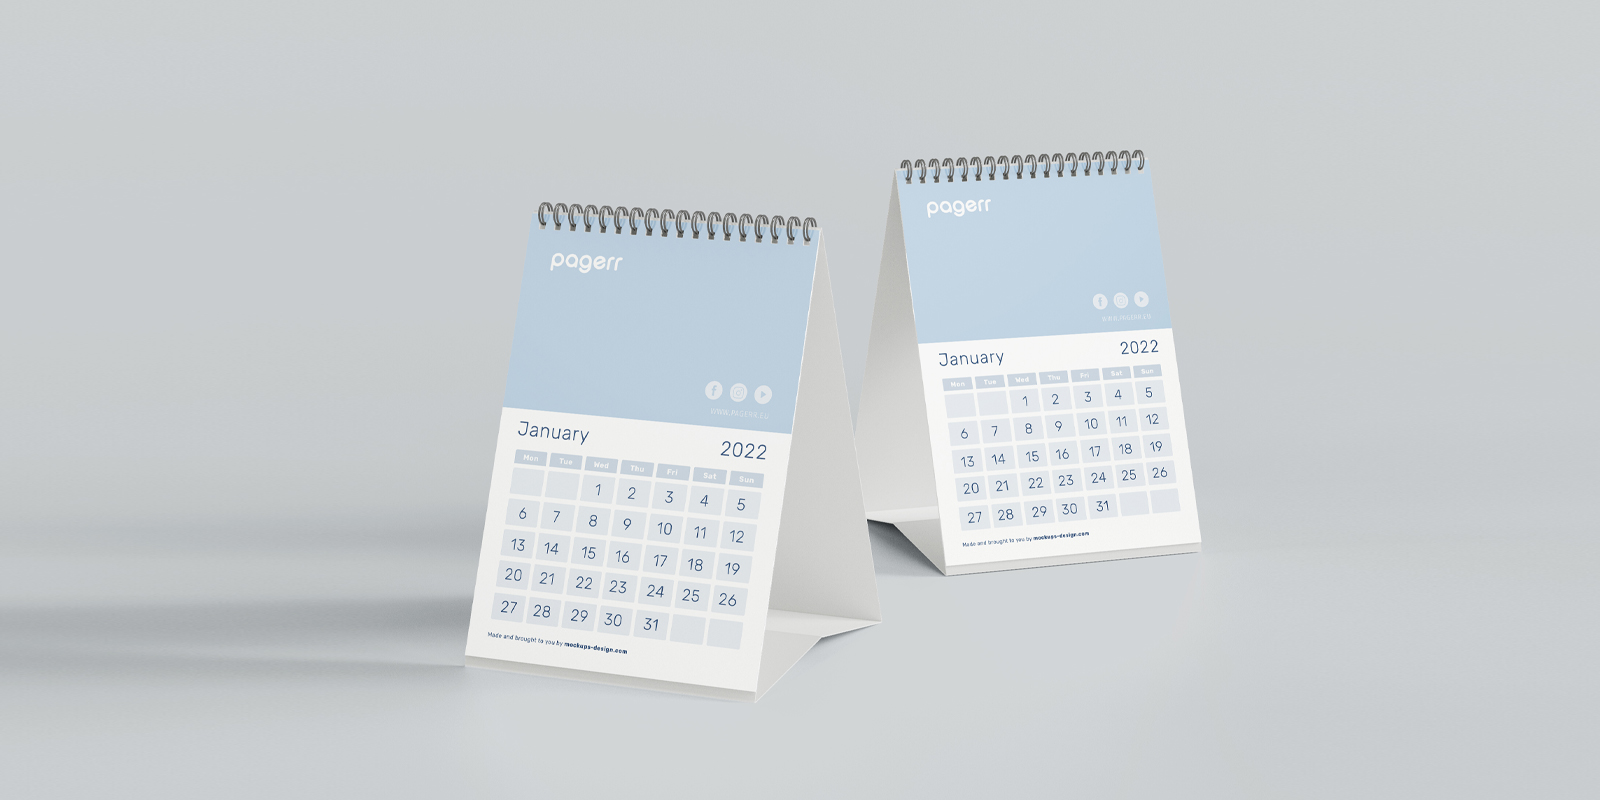 Desk calendars in Adelaide - Print with Pagerr